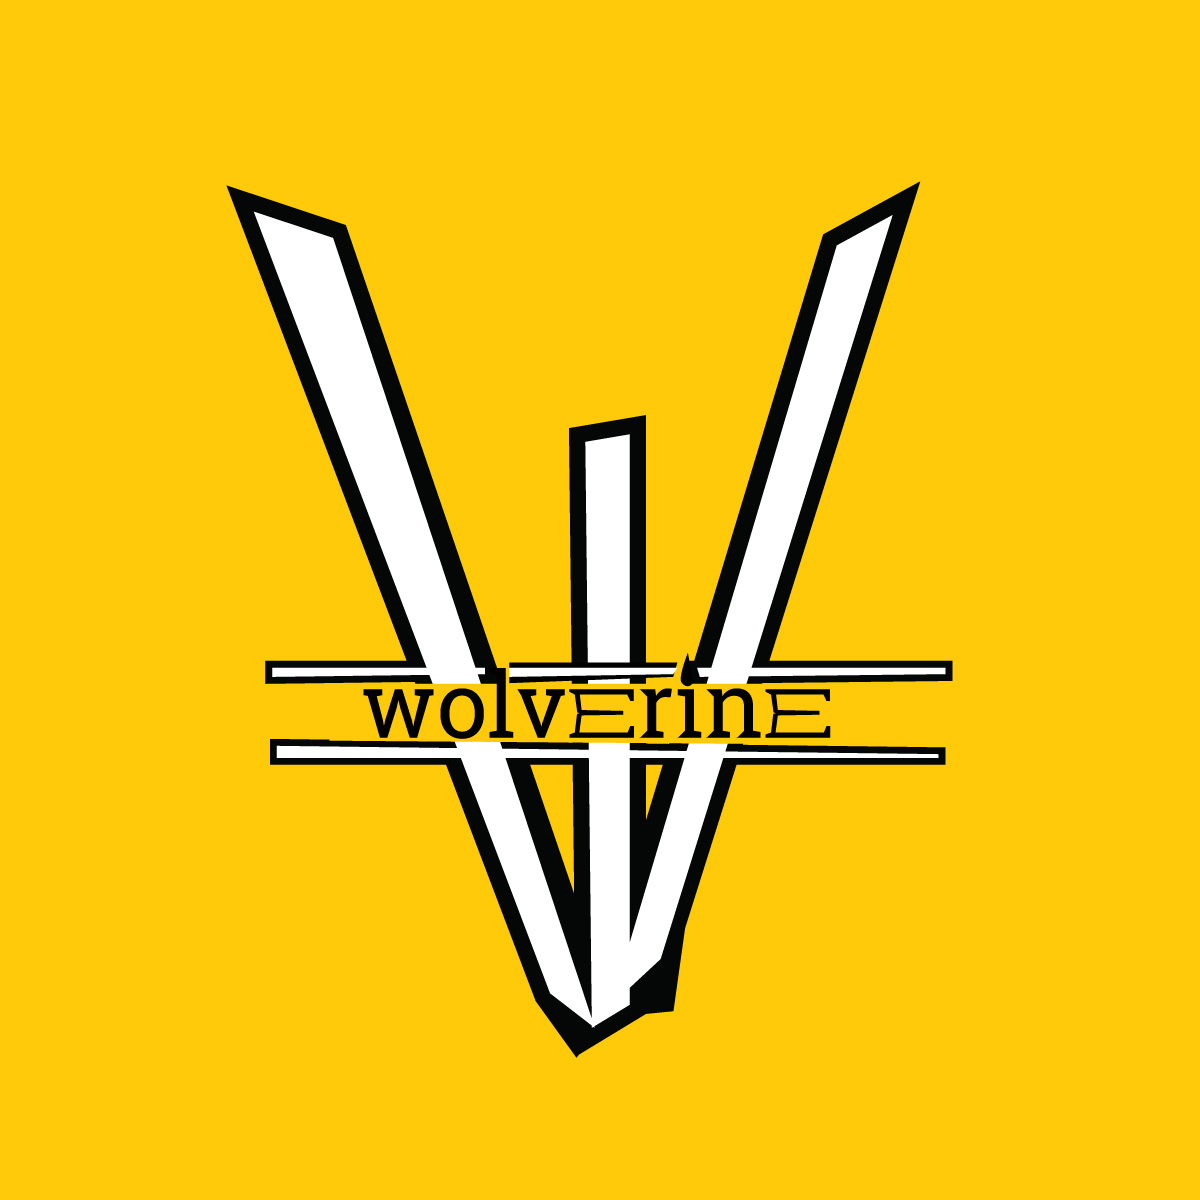 Wolverine Logo Cliparts, Stock Vector and Royalty Free Wolverine Logo  Illustrations